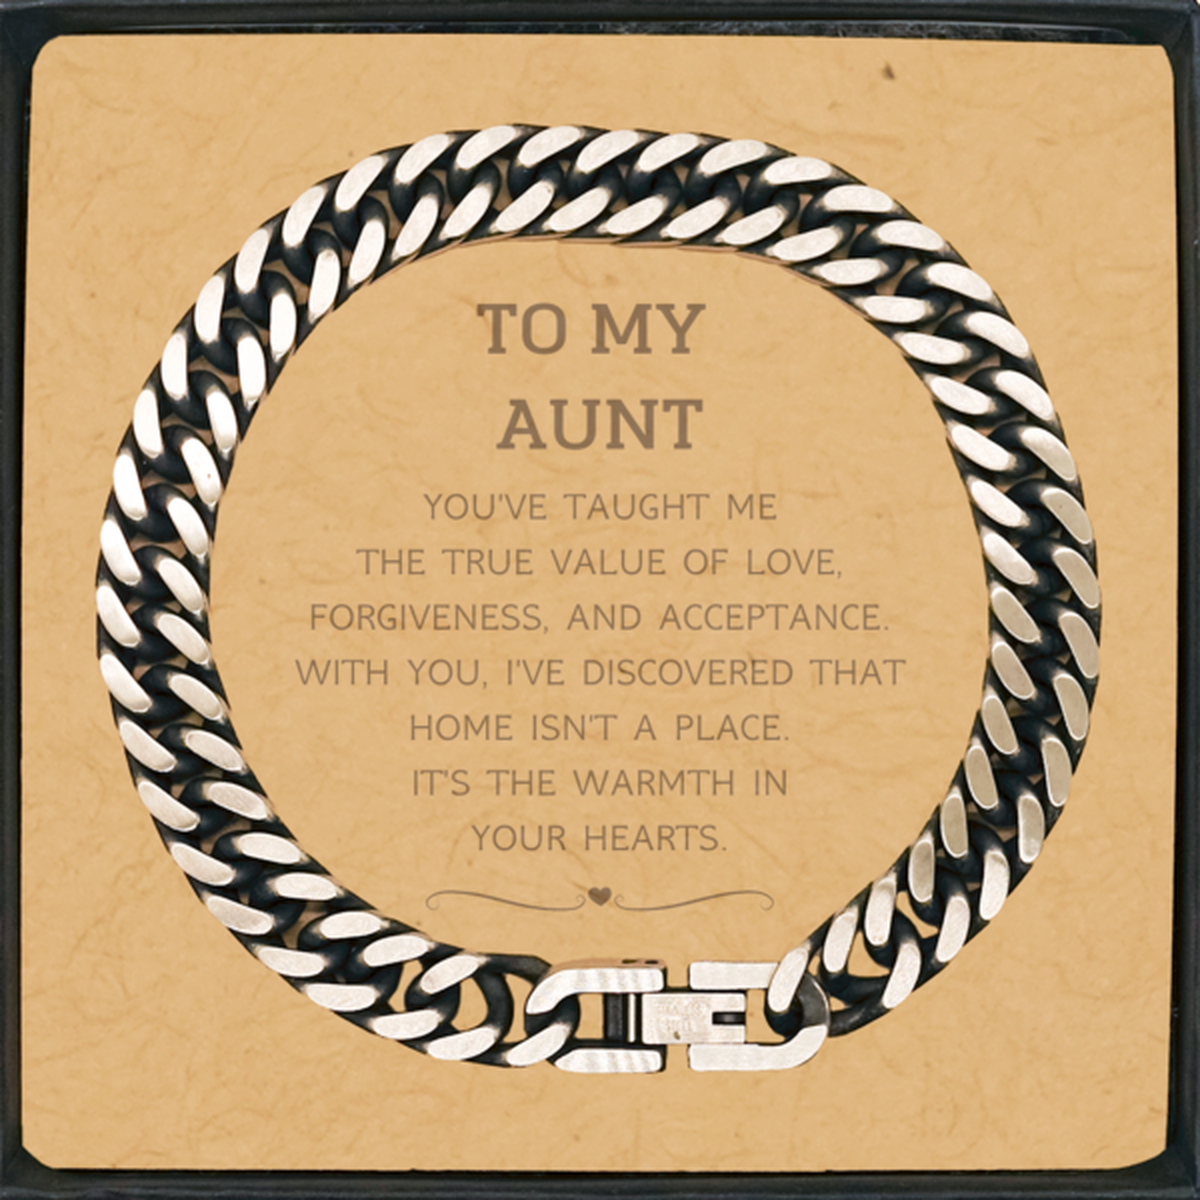 To My Aunt Gifts, You've taught me the true value of love, Thank You Gifts For Aunt, Birthday Cuban Link Chain Bracelet For Aunt